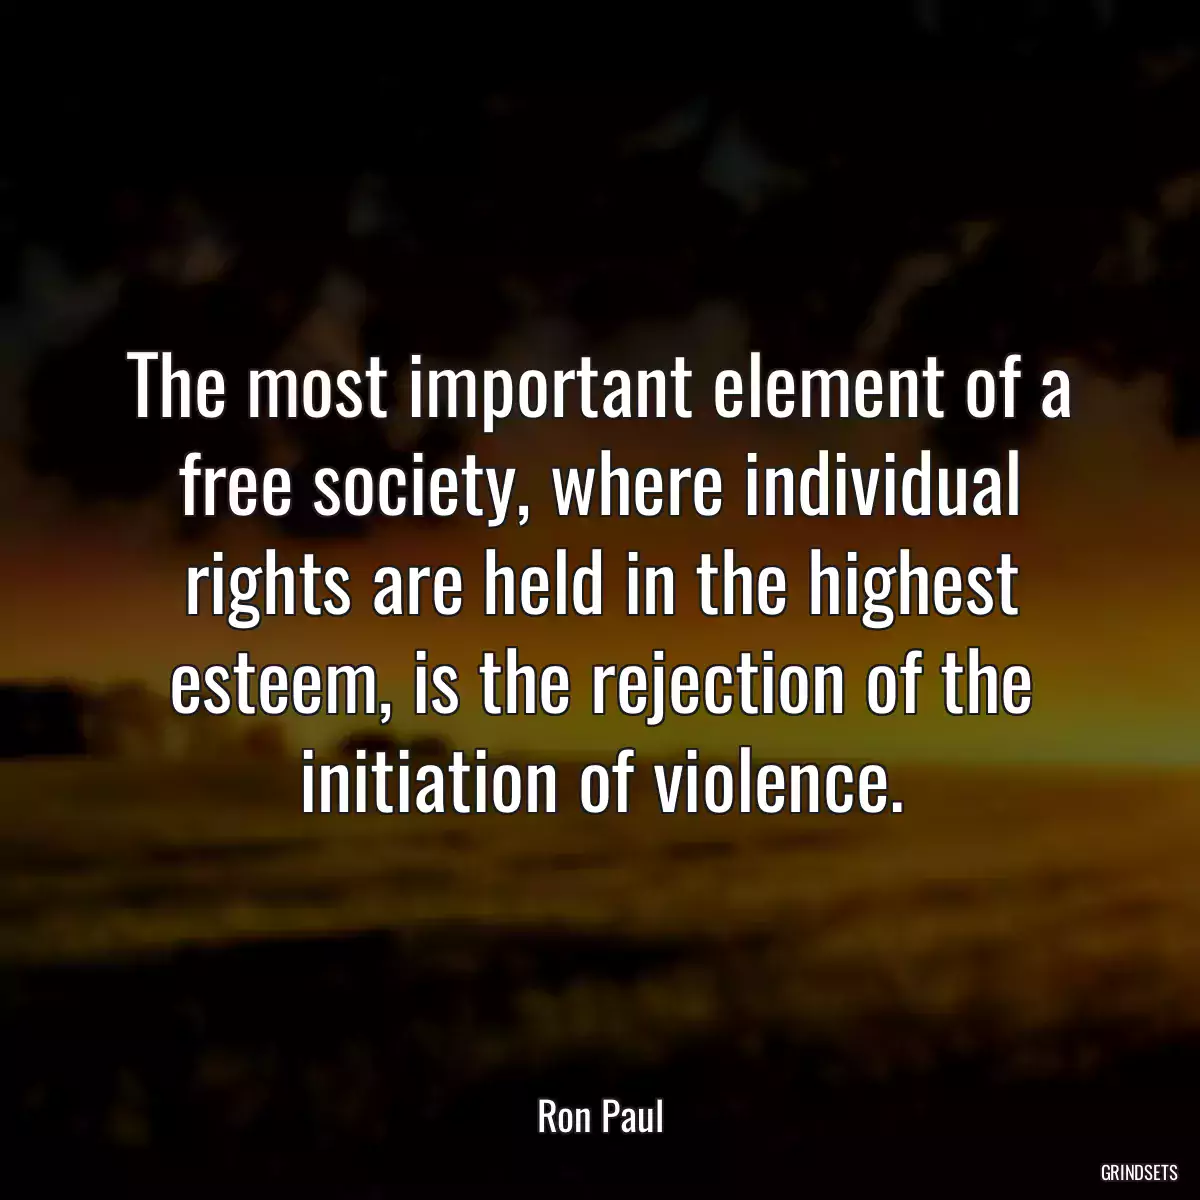 The most important element of a free society, where individual rights are held in the highest esteem, is the rejection of the initiation of violence.